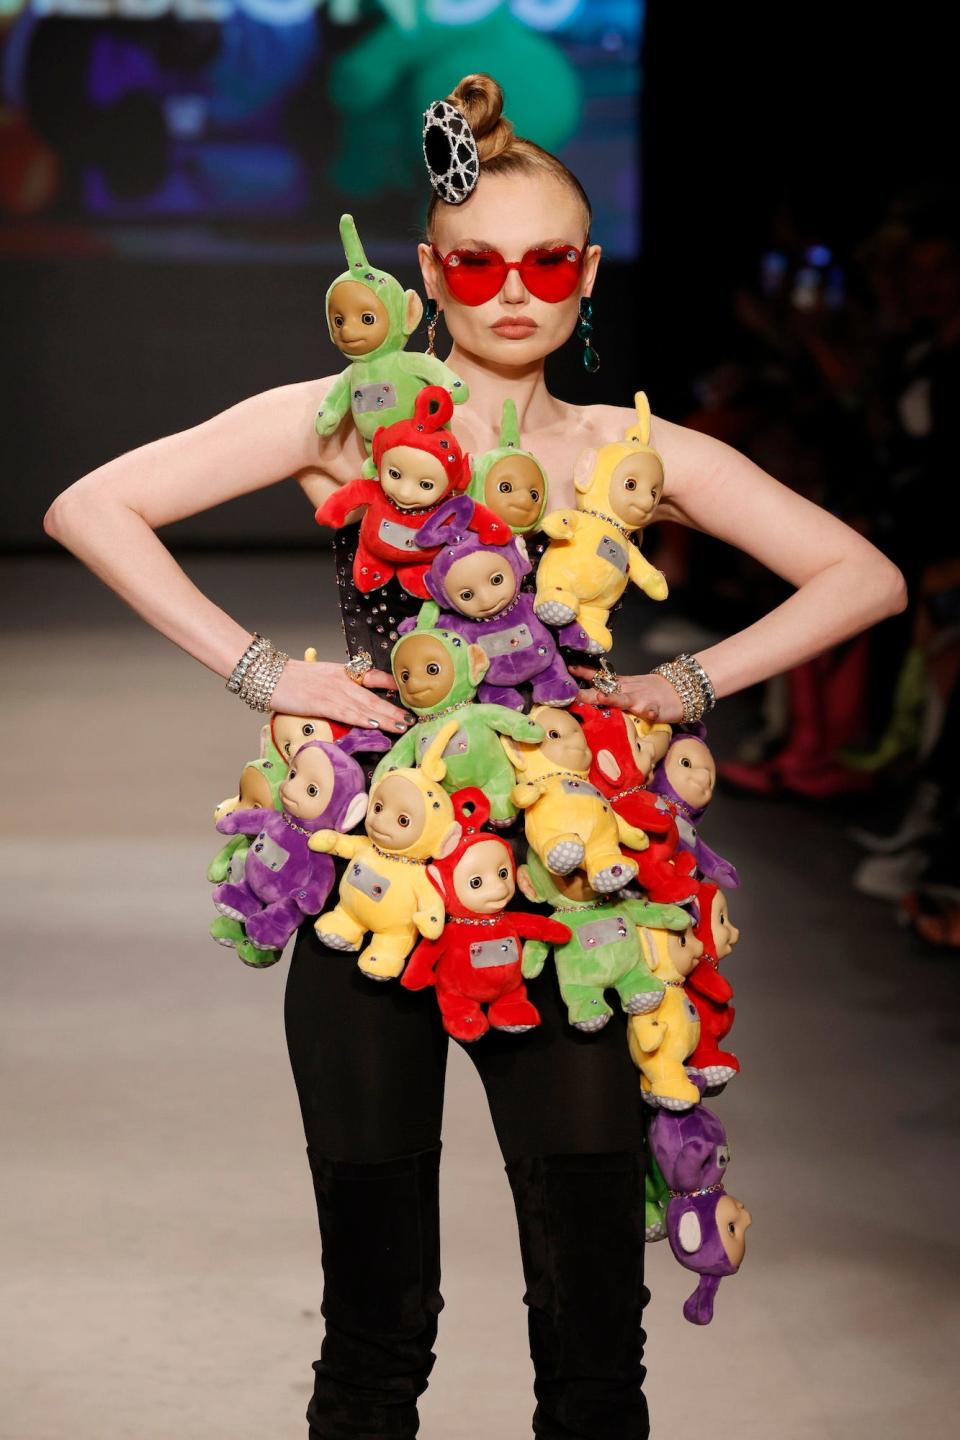 A model for The Blonds wears a "Teletubbies" jumpsuit at Miami Swim Week 2023.